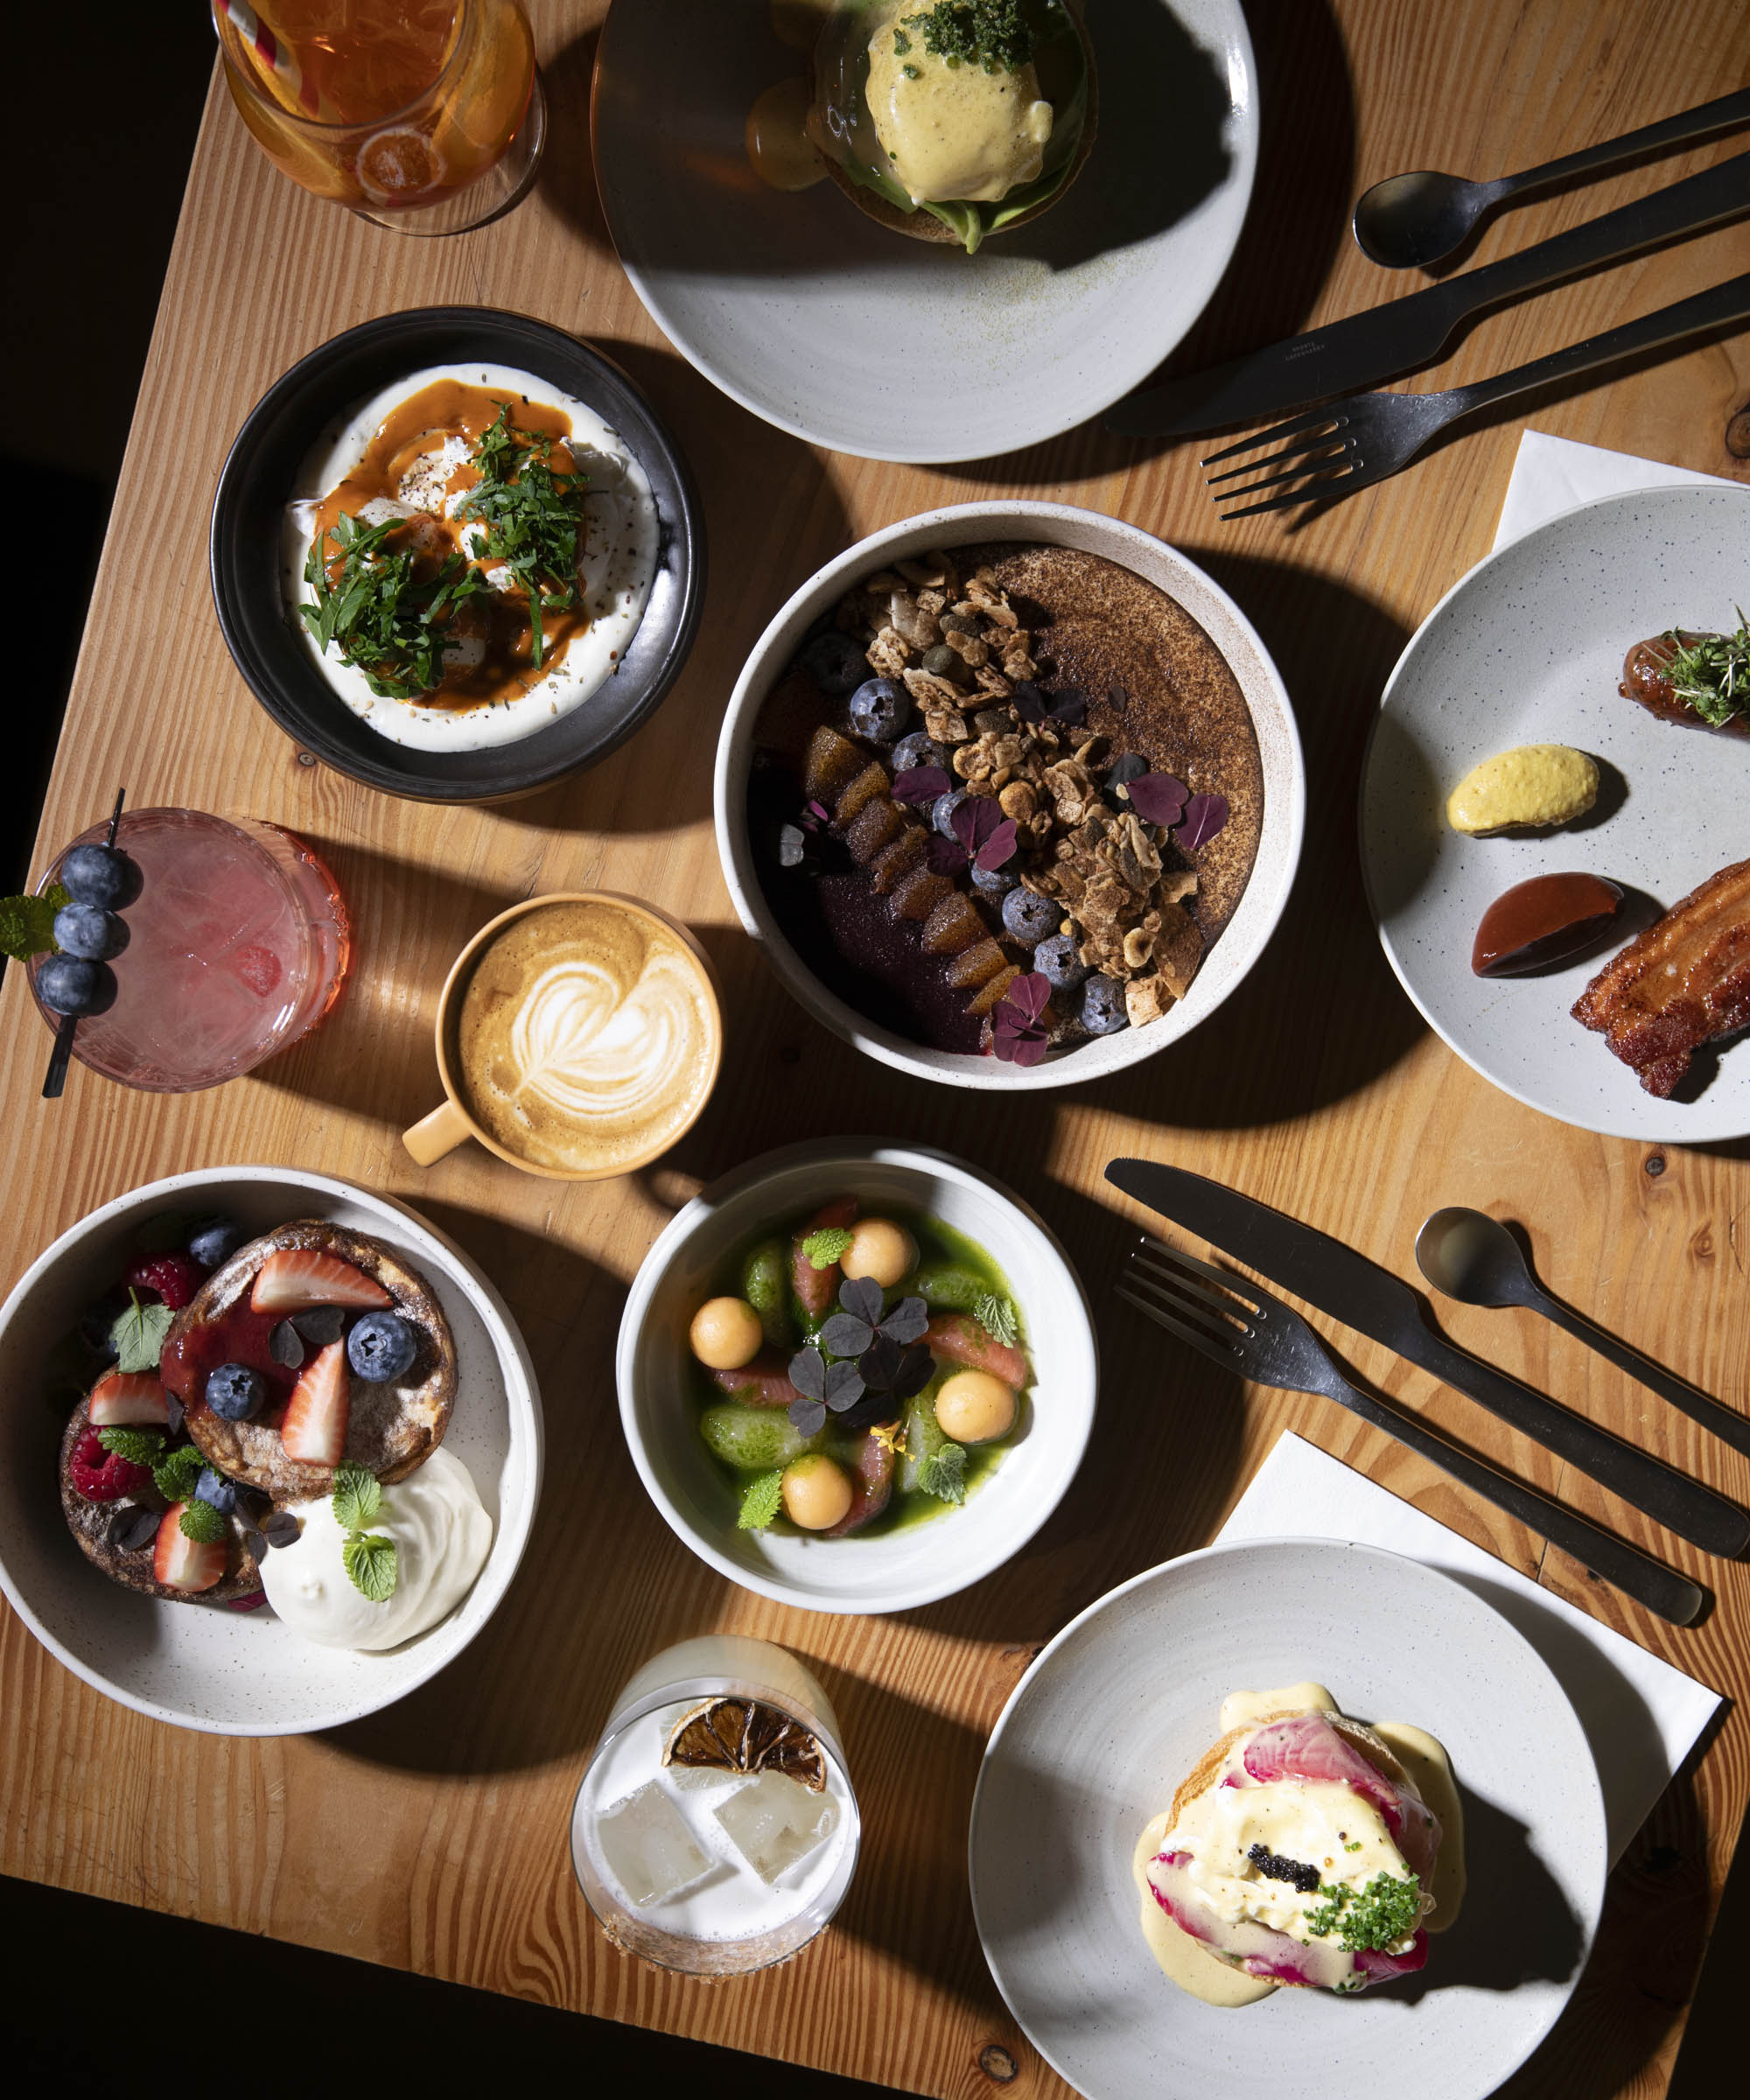 Pick whatever you like for weekend brunch at Venner – Two former Kadeau chefs are creating a buzz with this must-try brunch spot in City Center